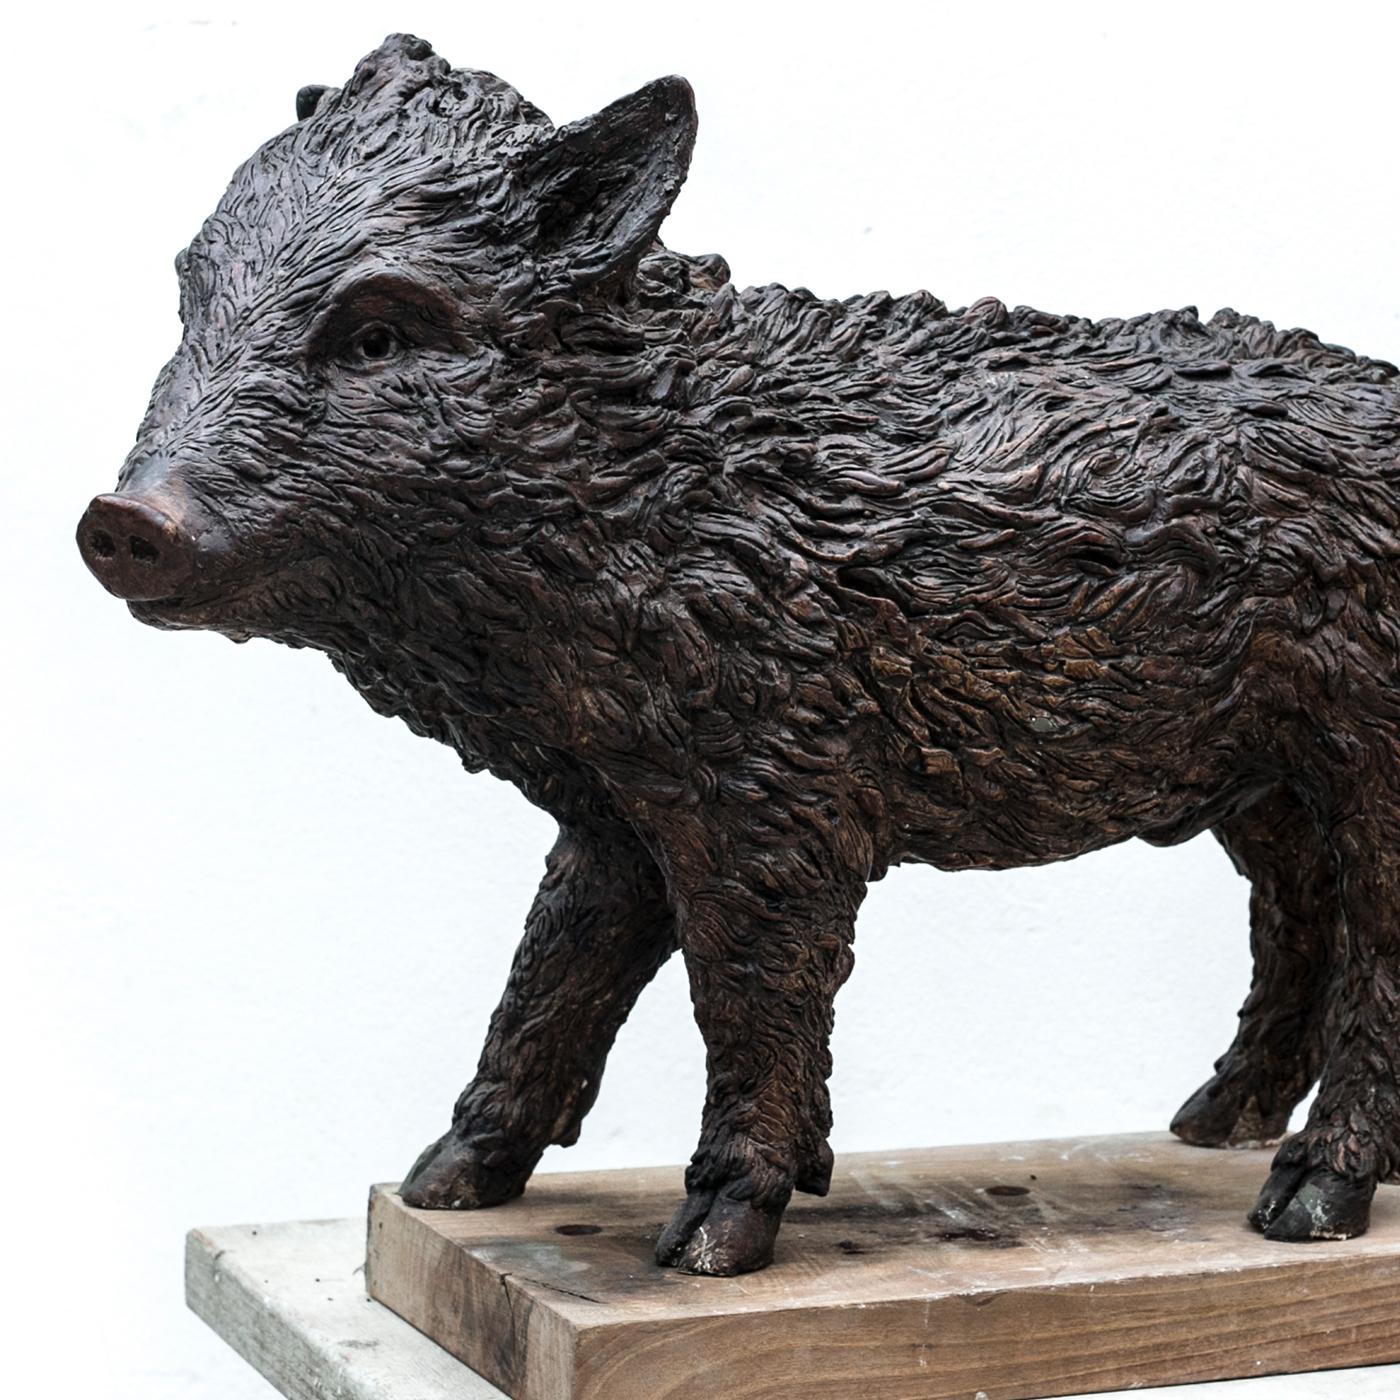 This baby wild boar is a superb sculpture crafted by Vincenzo Romanelli in 2011. Part of the landscape of the Tuscan countryside, the boar has been studied by the artist in its local habitat. This is part of a collection of pieces that depict this